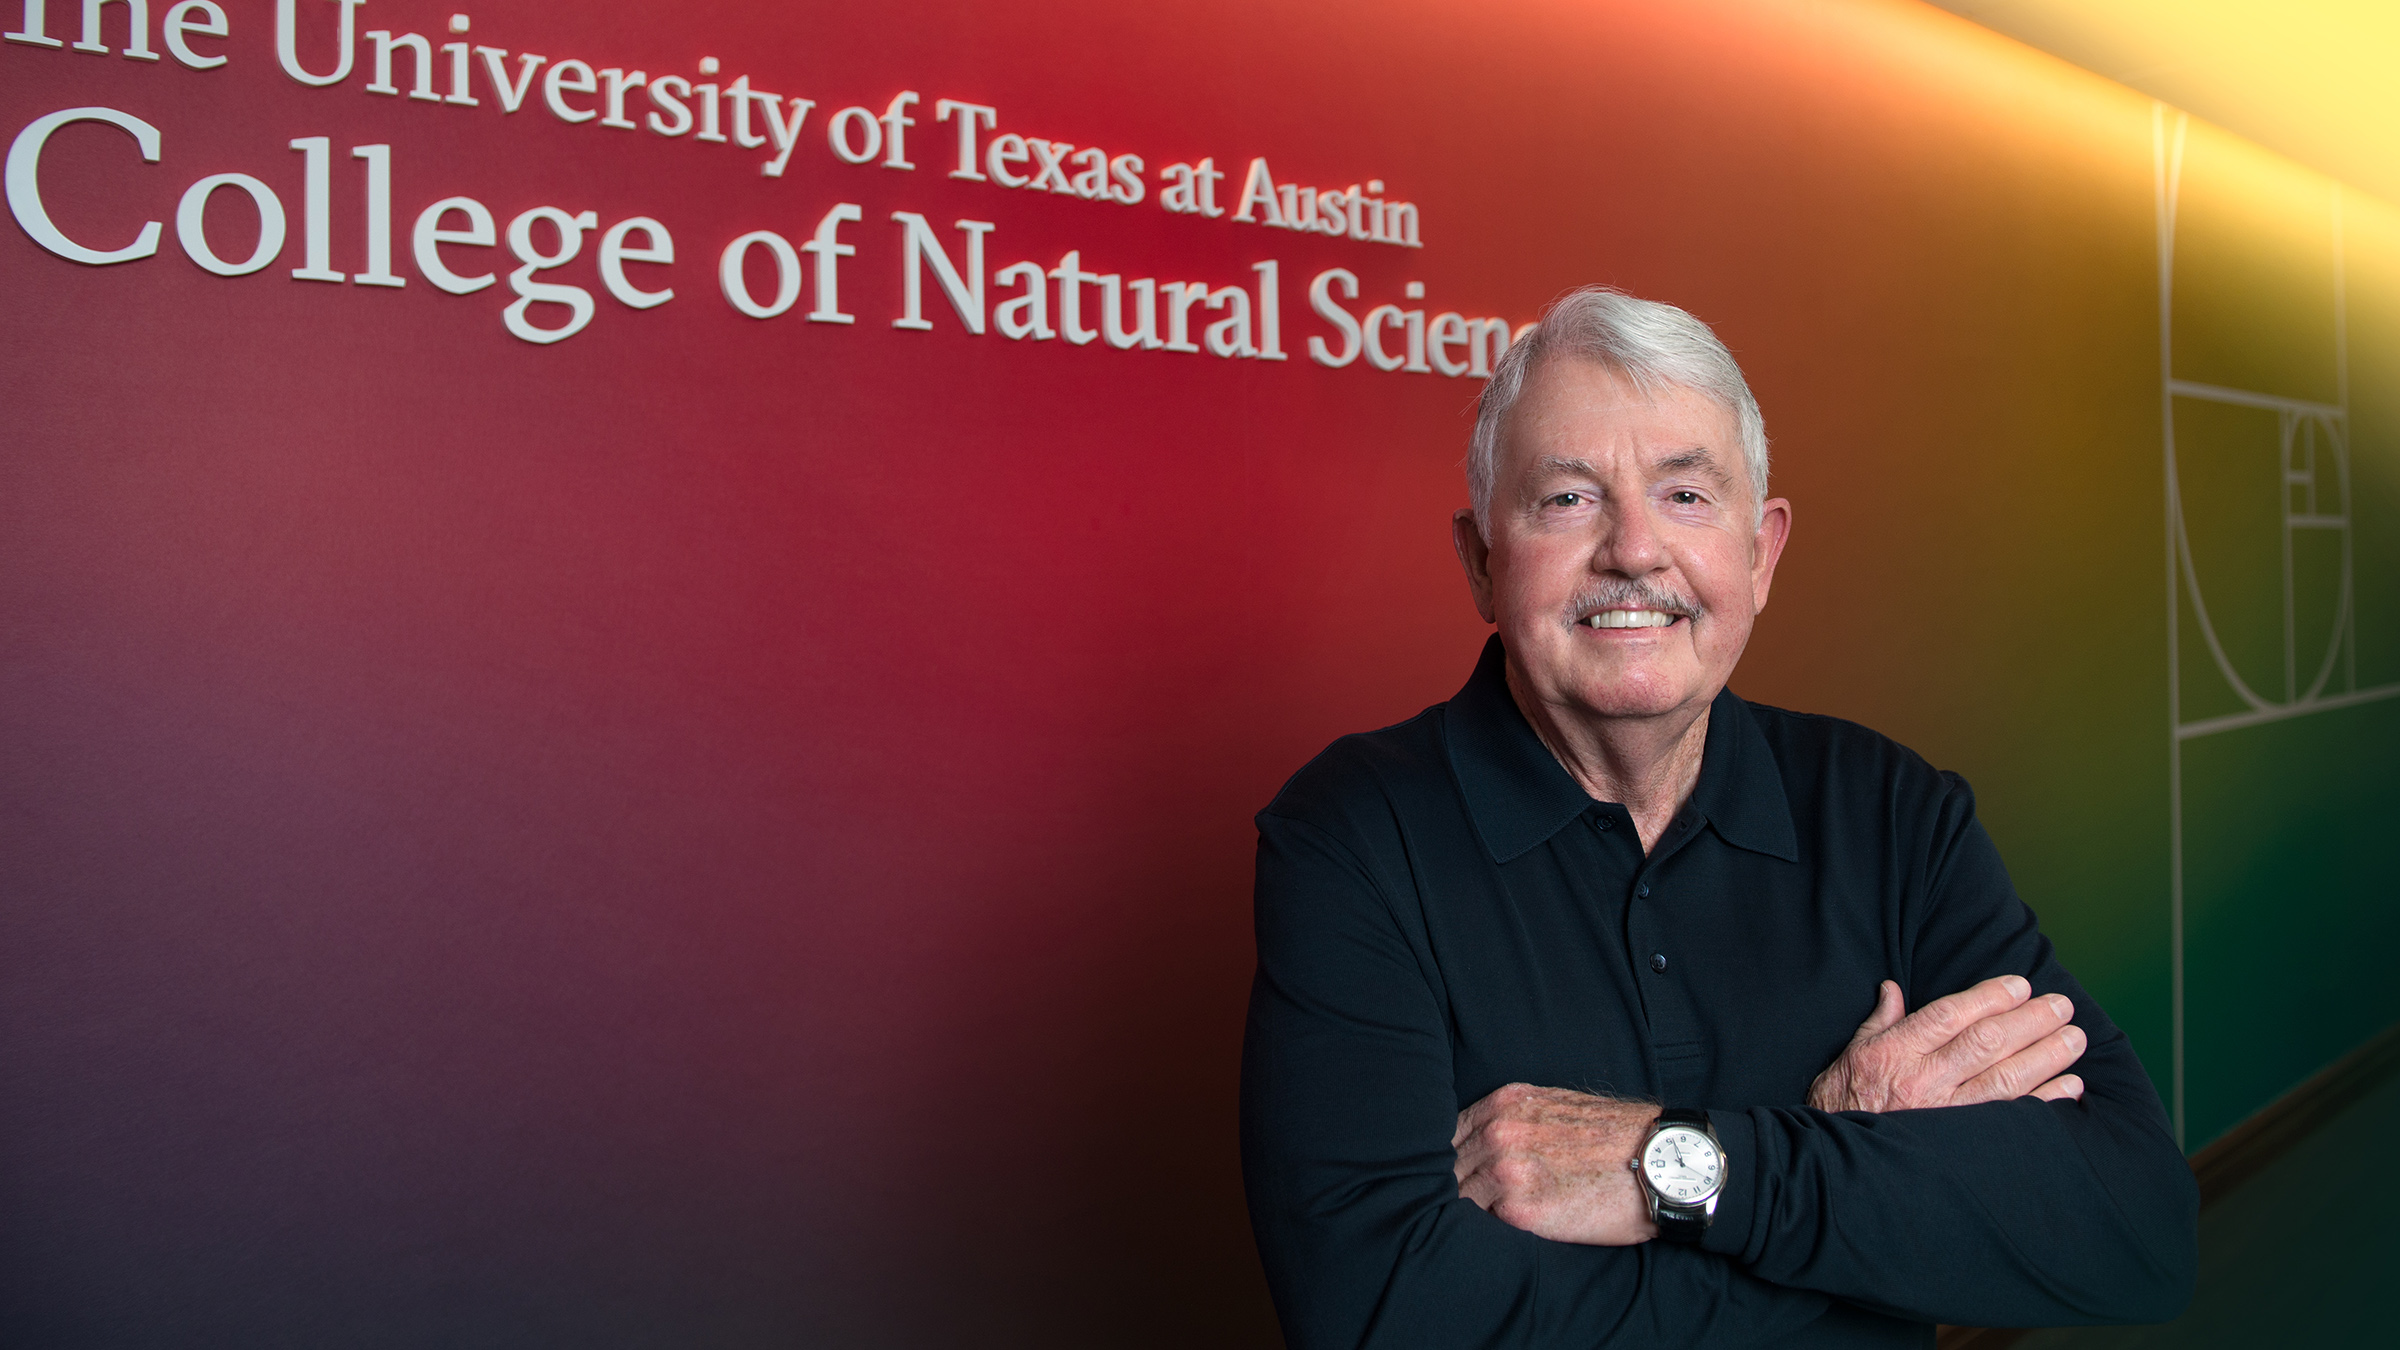 A man stands with arms crossed in front of a wall that says &quot;The University of Texas at Austin College of Natural Sciences&quot;